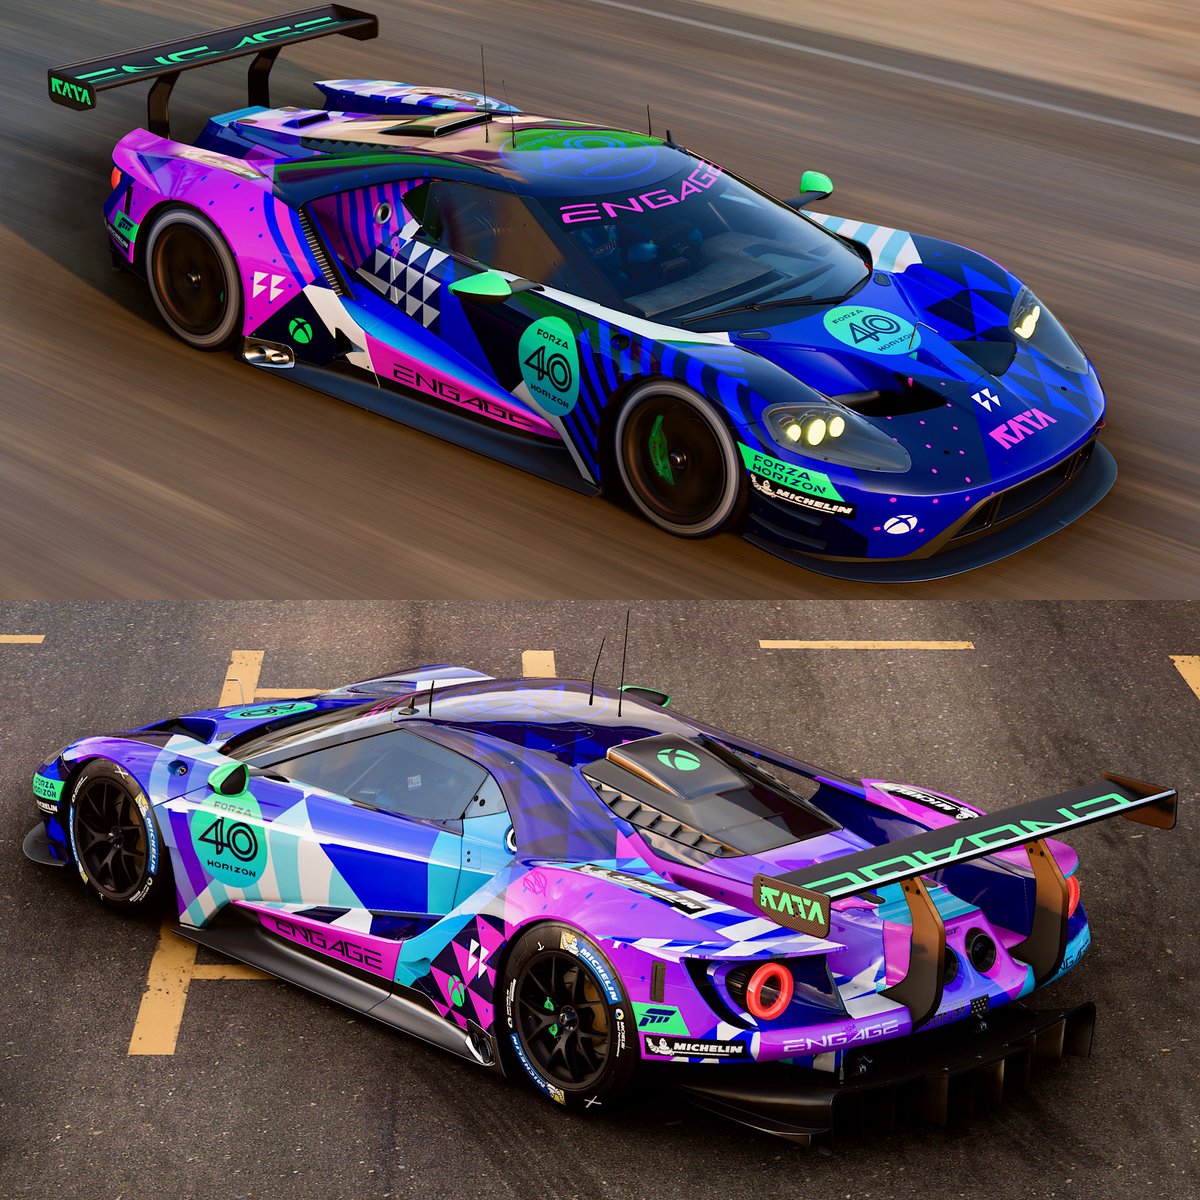 Such a cool car. I just had to make a livery for it. Racing cars are among my favorites to Design liveries for. 

‘16 Ford GT #66 GTLM
sc: 661 702 086
gt: FormFirm

#Forzapaintbooth #FH5 #ForzaHorizon5